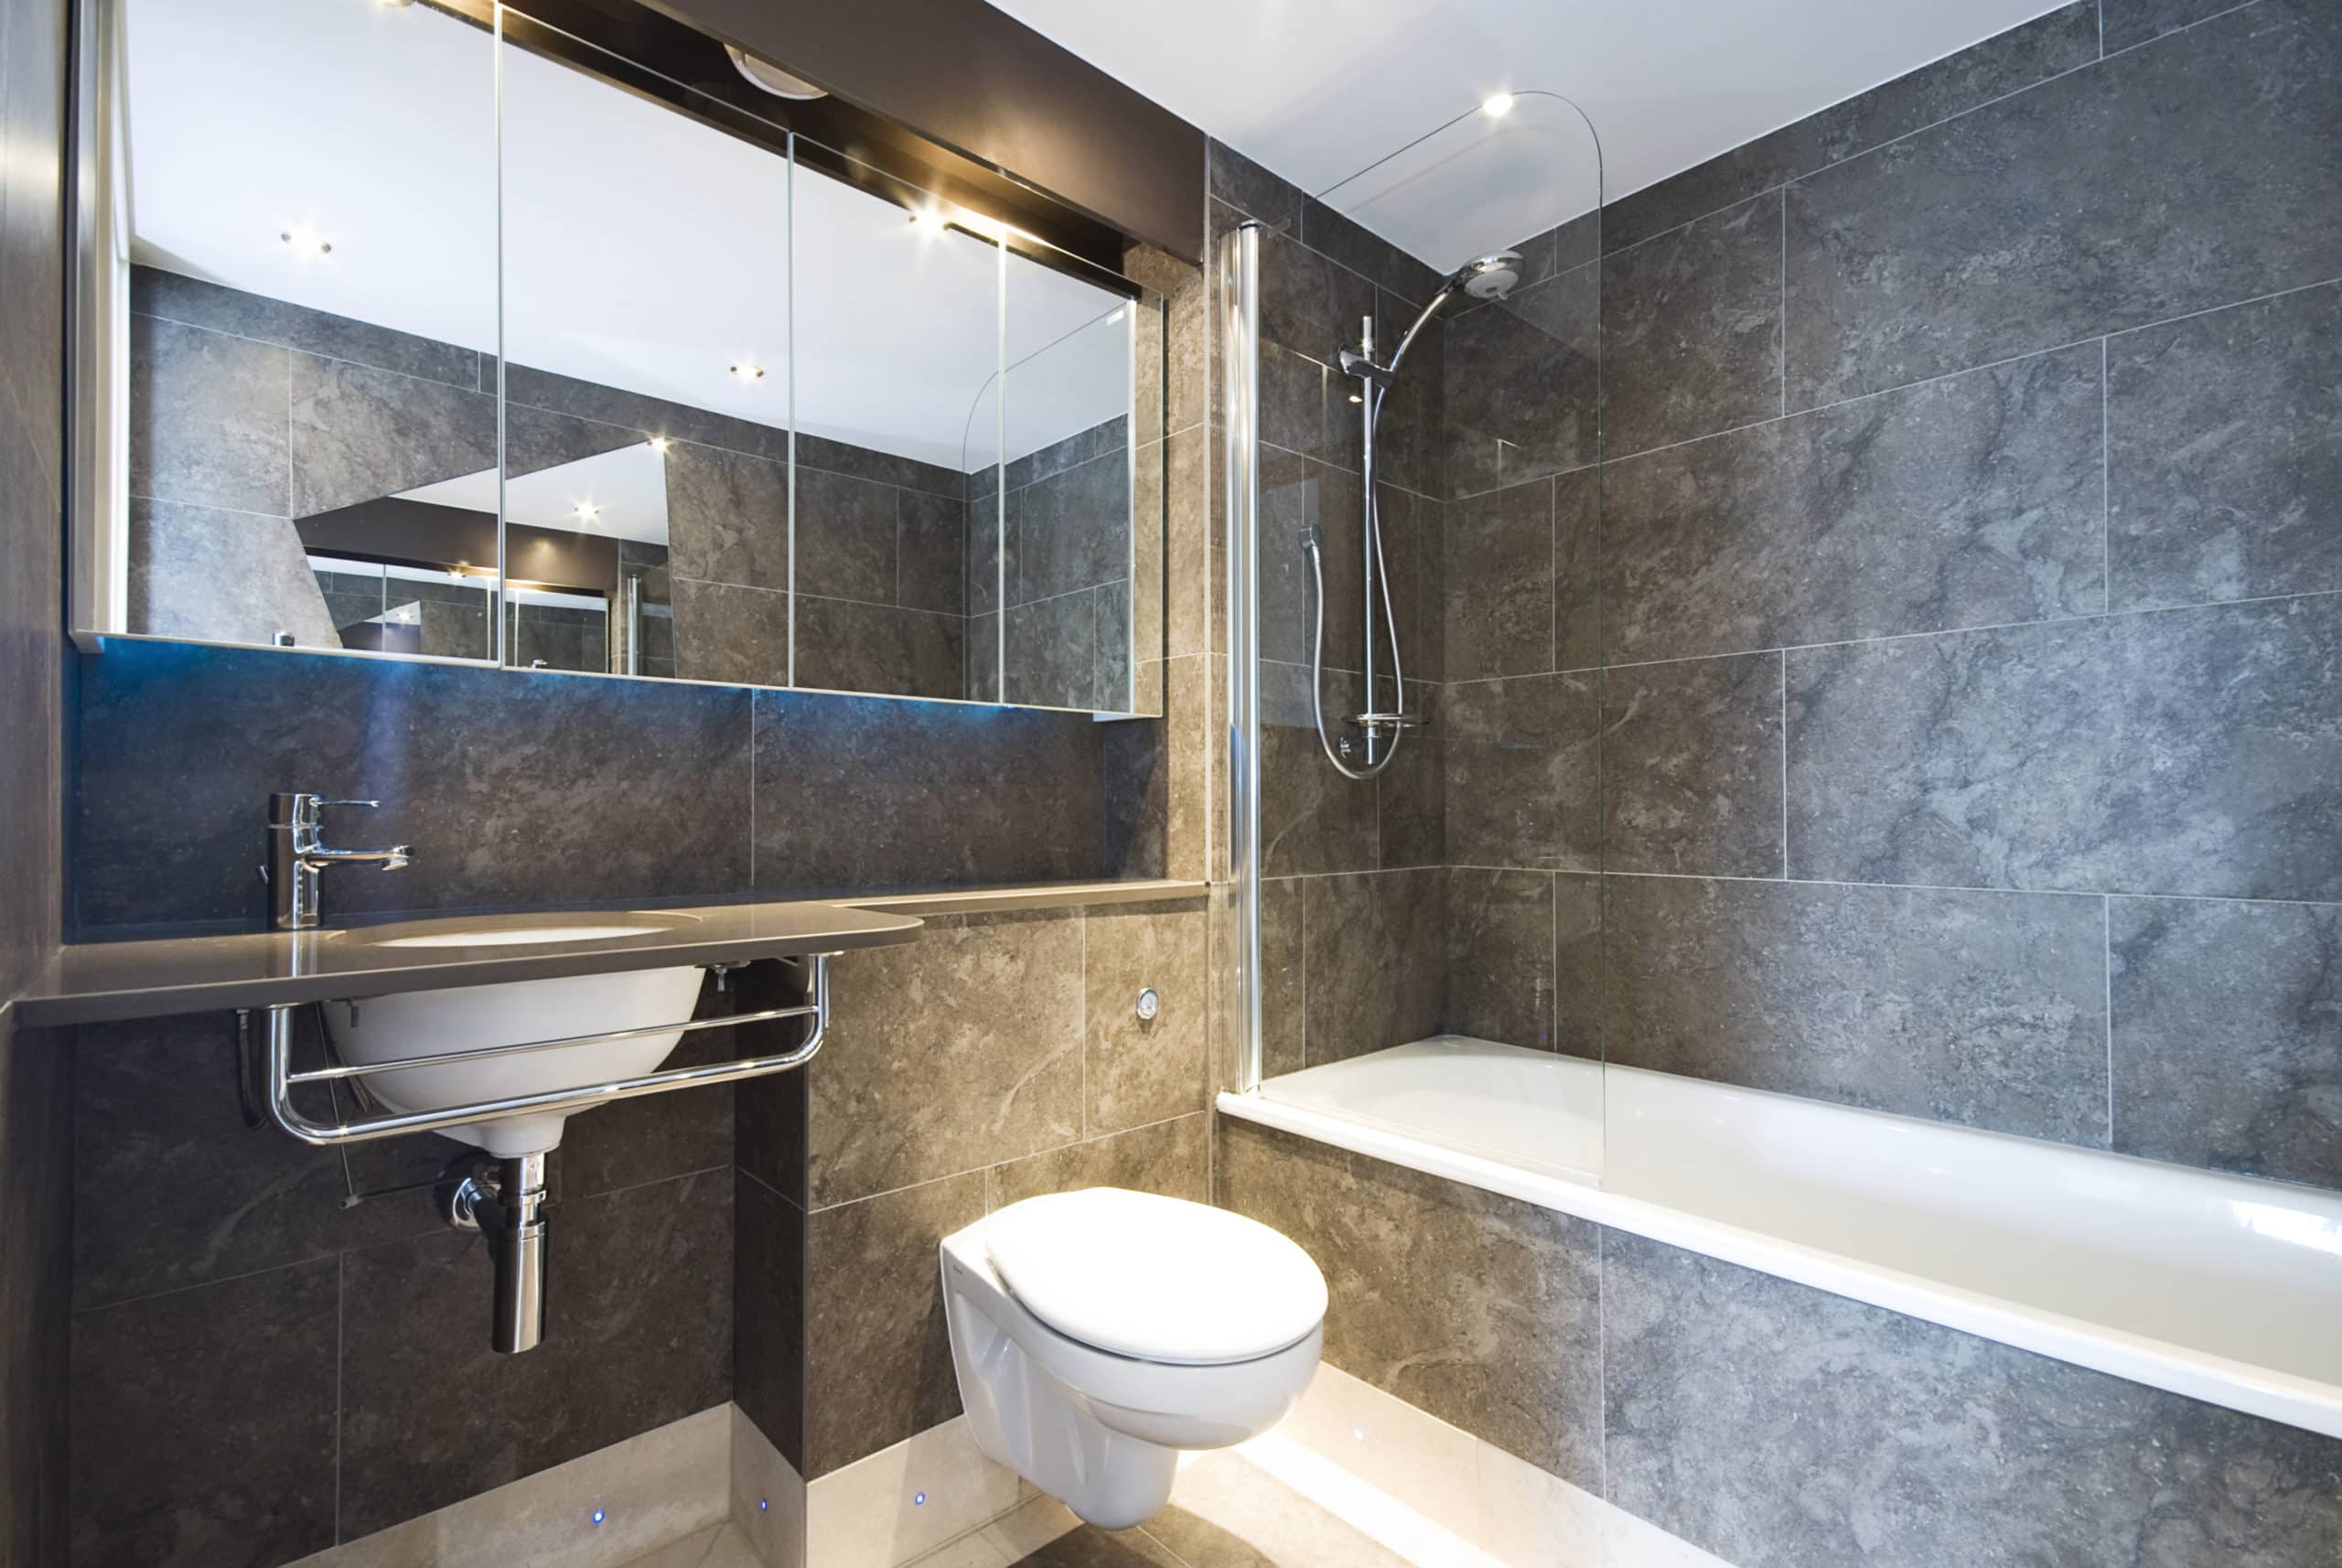 Contemporary en-suite bathroom with natural stone tiles and marble fragments in cappuccino brown